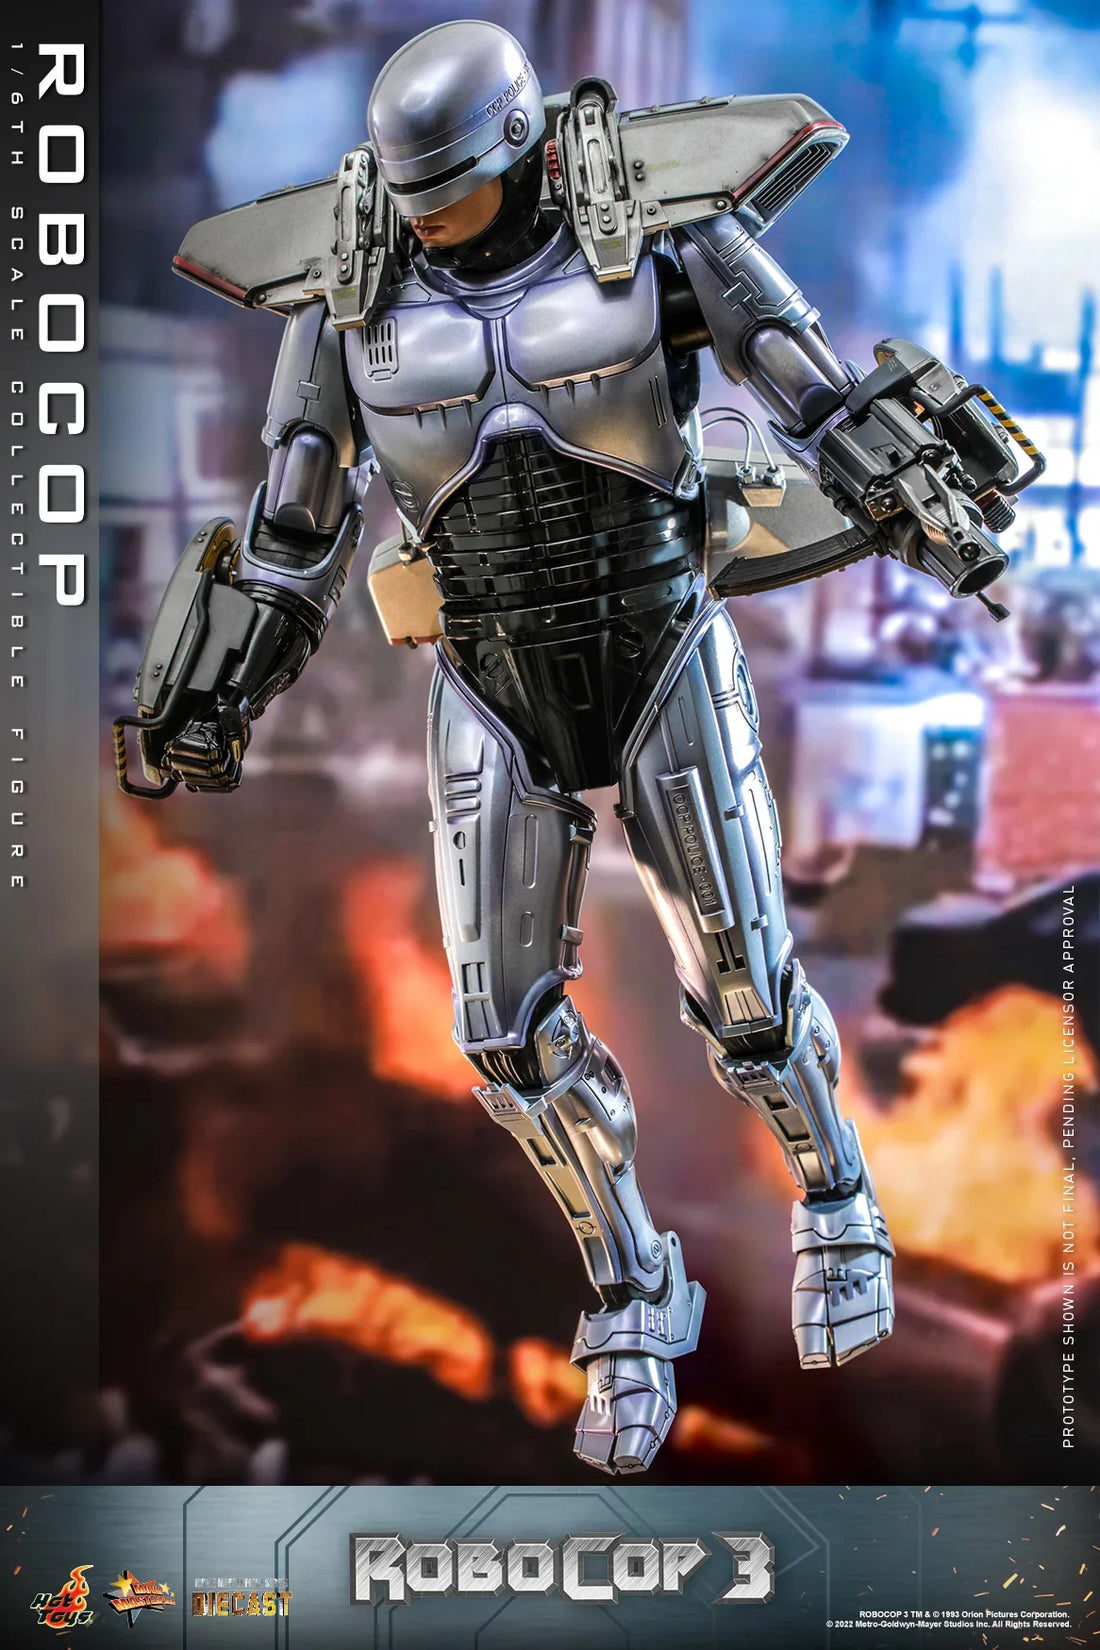 Hottoys Ht 1/6 Mms669d49 Robocop 3 Anime Peripheral Action Figures Model Garage Kit Statue Toys Collection Children Gift Figura